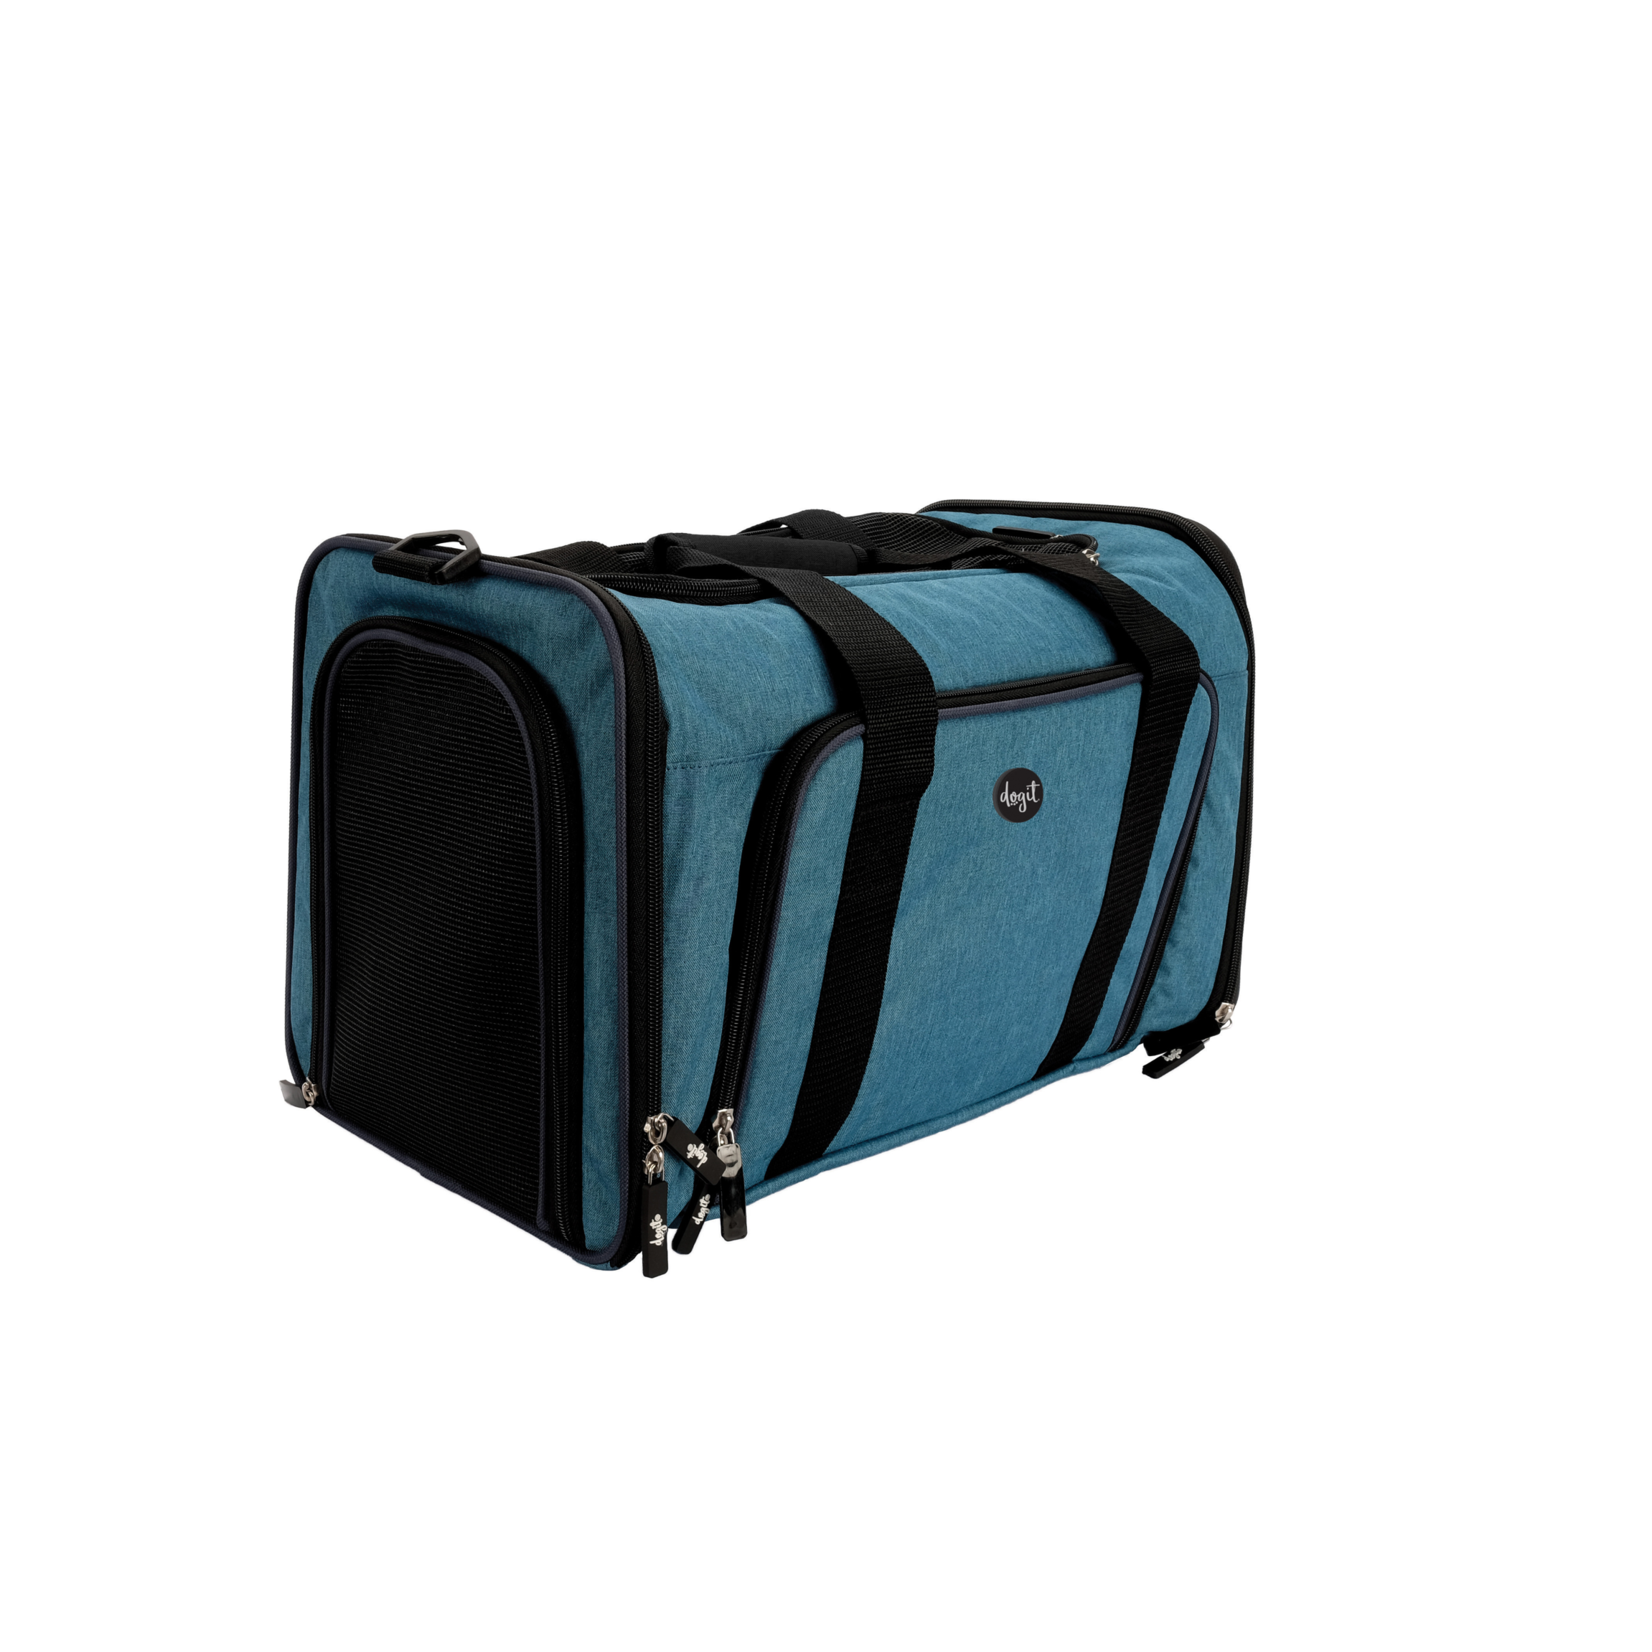 Dogit expandable soft dog carrier